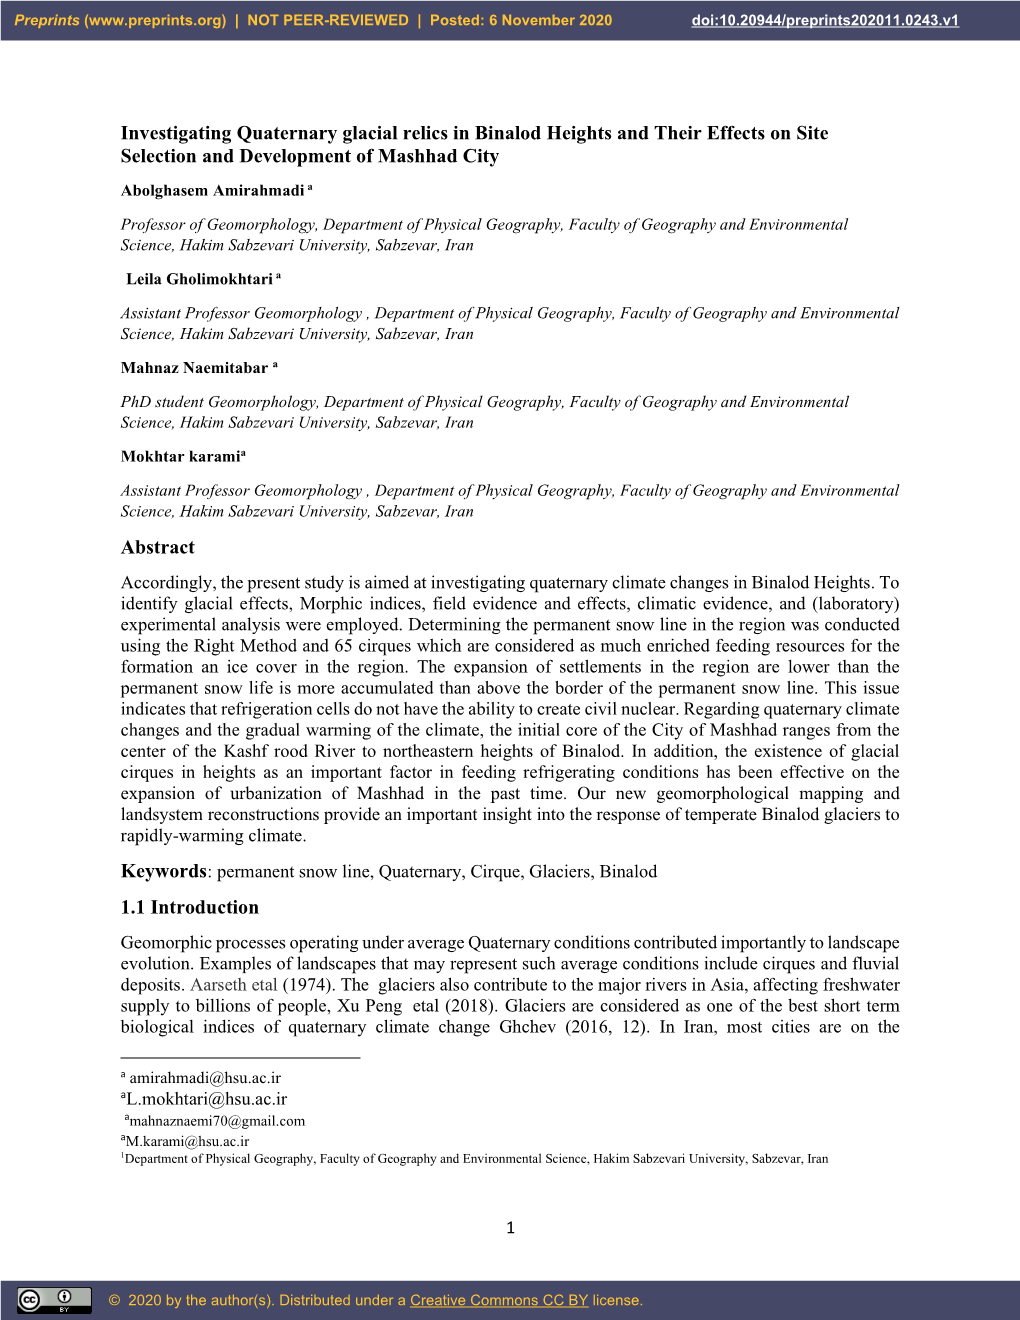 Investigating Quaternary Glacial Relics in Binalod Heights and Their Effects on Site Selection and Development of Mashhad City Abolghasem Amirahmadi A1